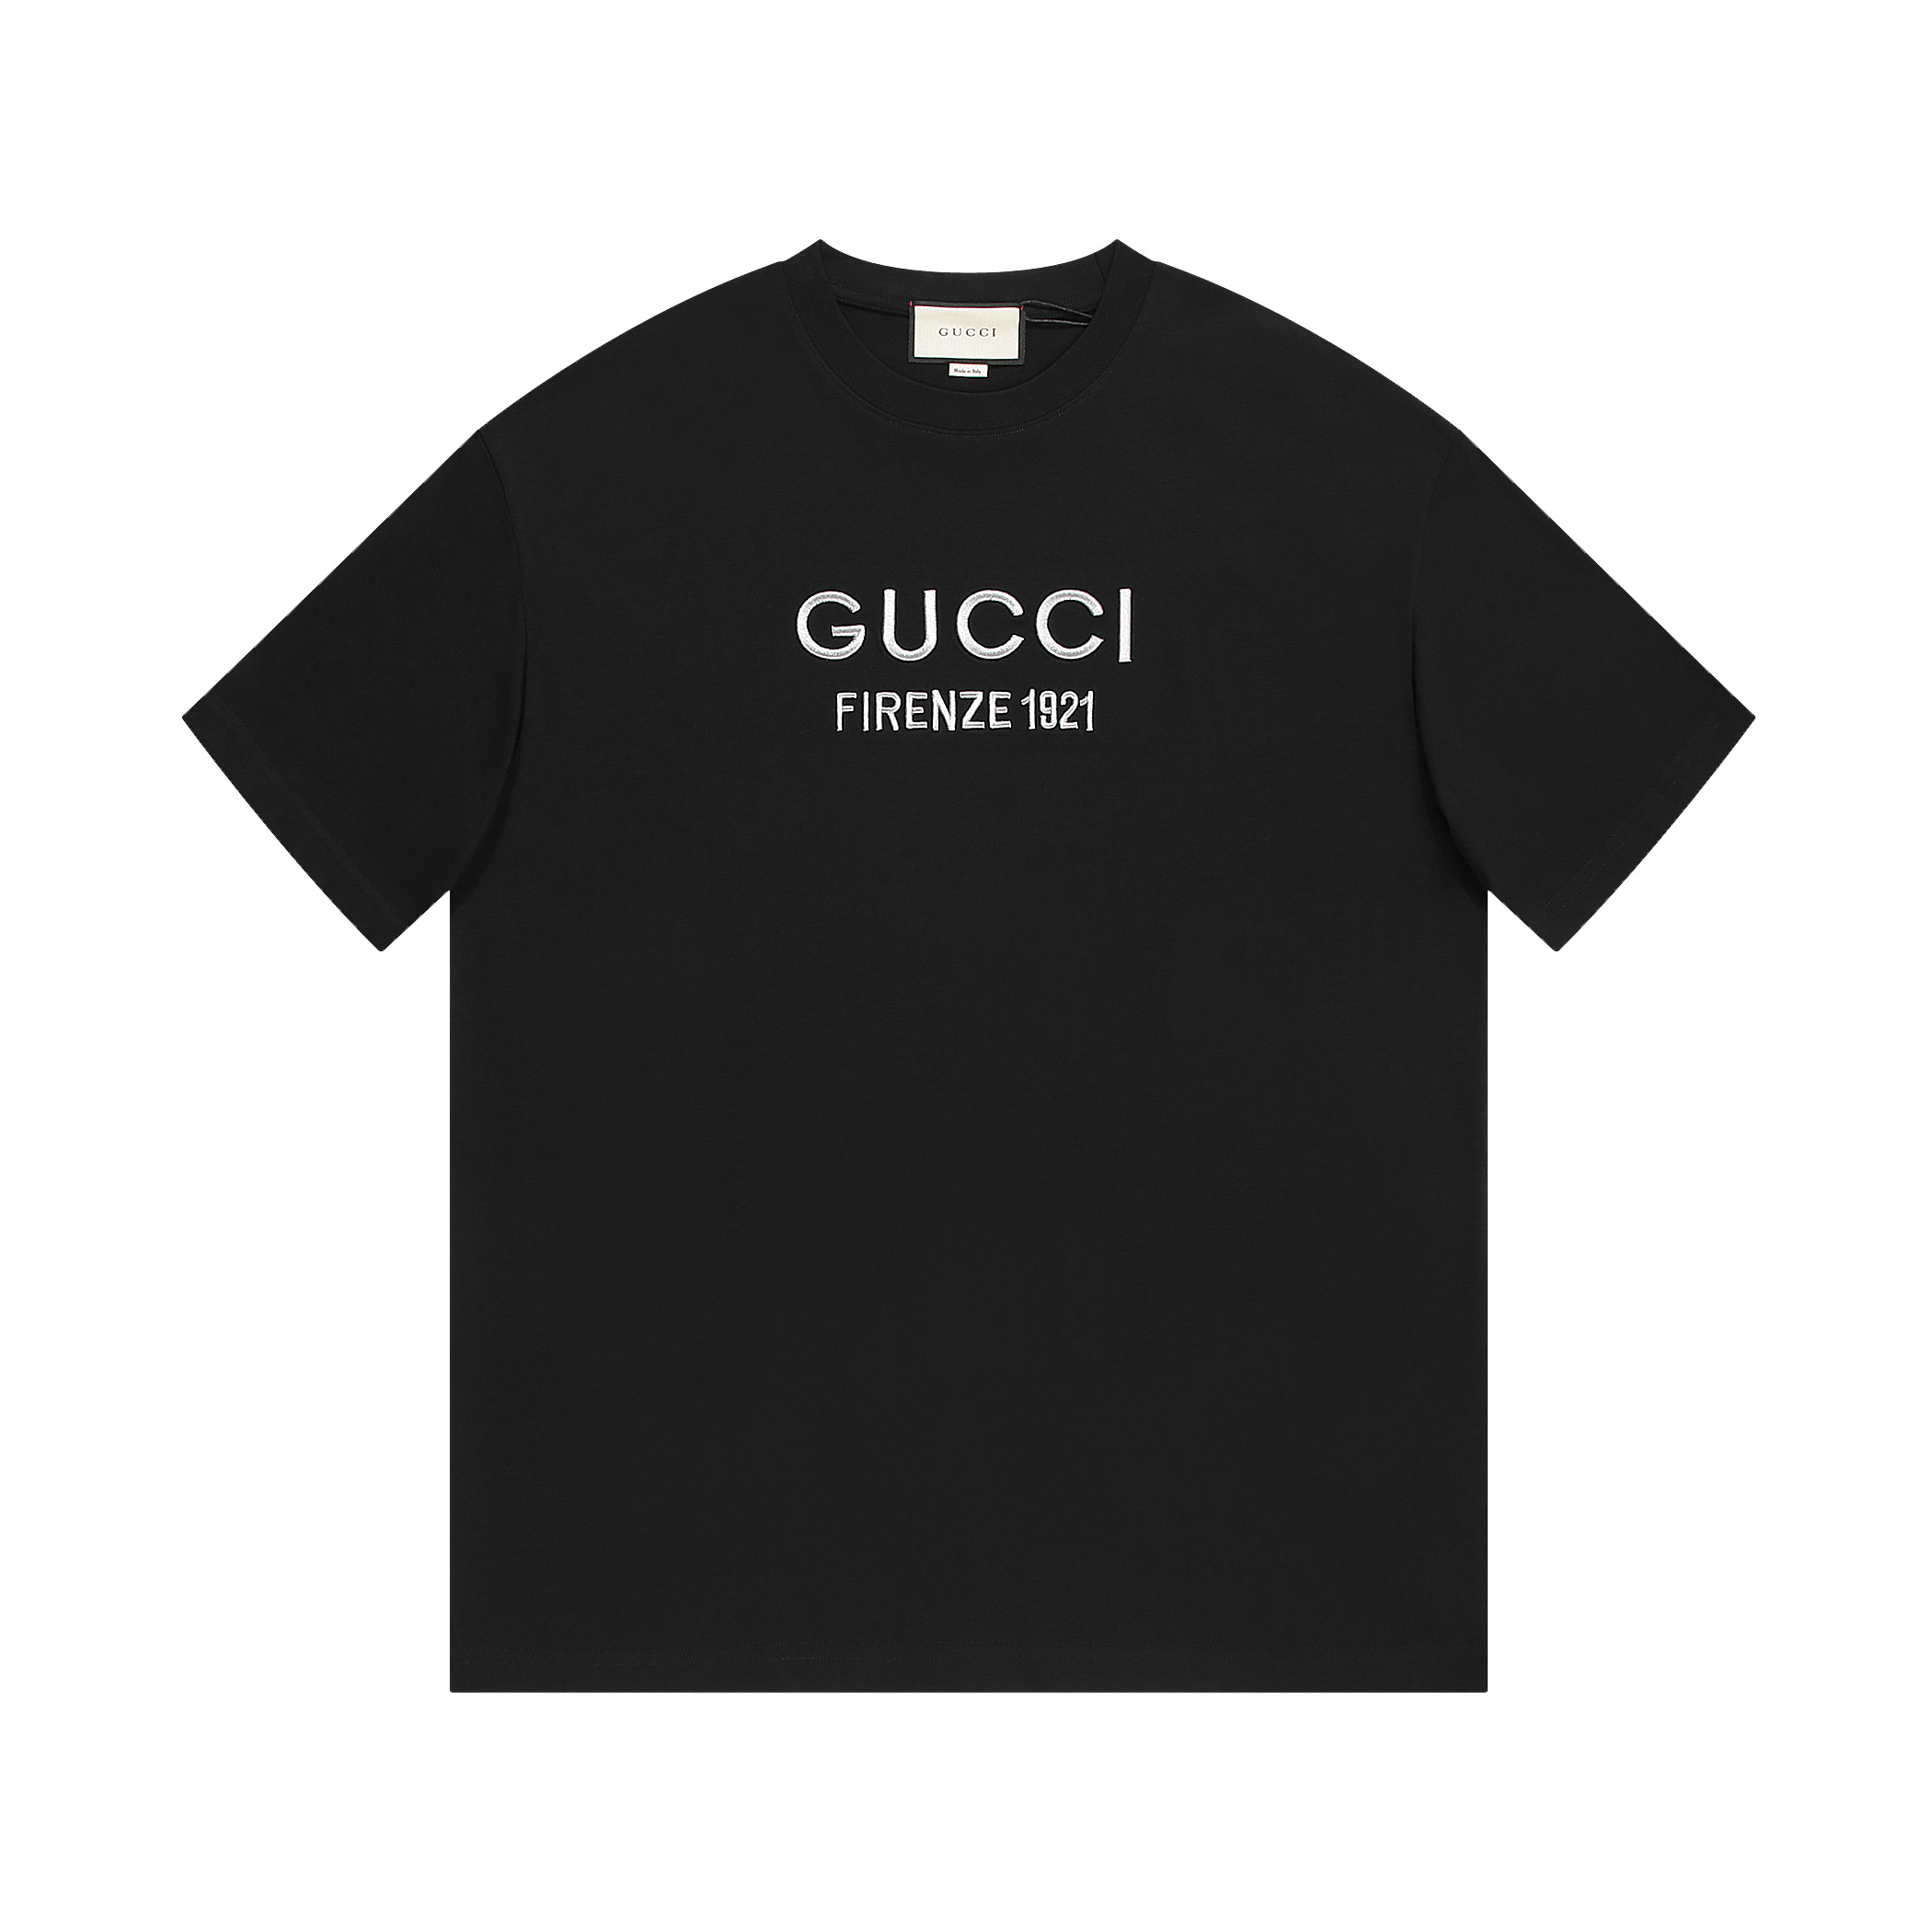 Gucci Clothing T-Shirt Apricot Color Black Embroidery Unisex Cotton Spring/Summer Collection Fashion Short Sleeve